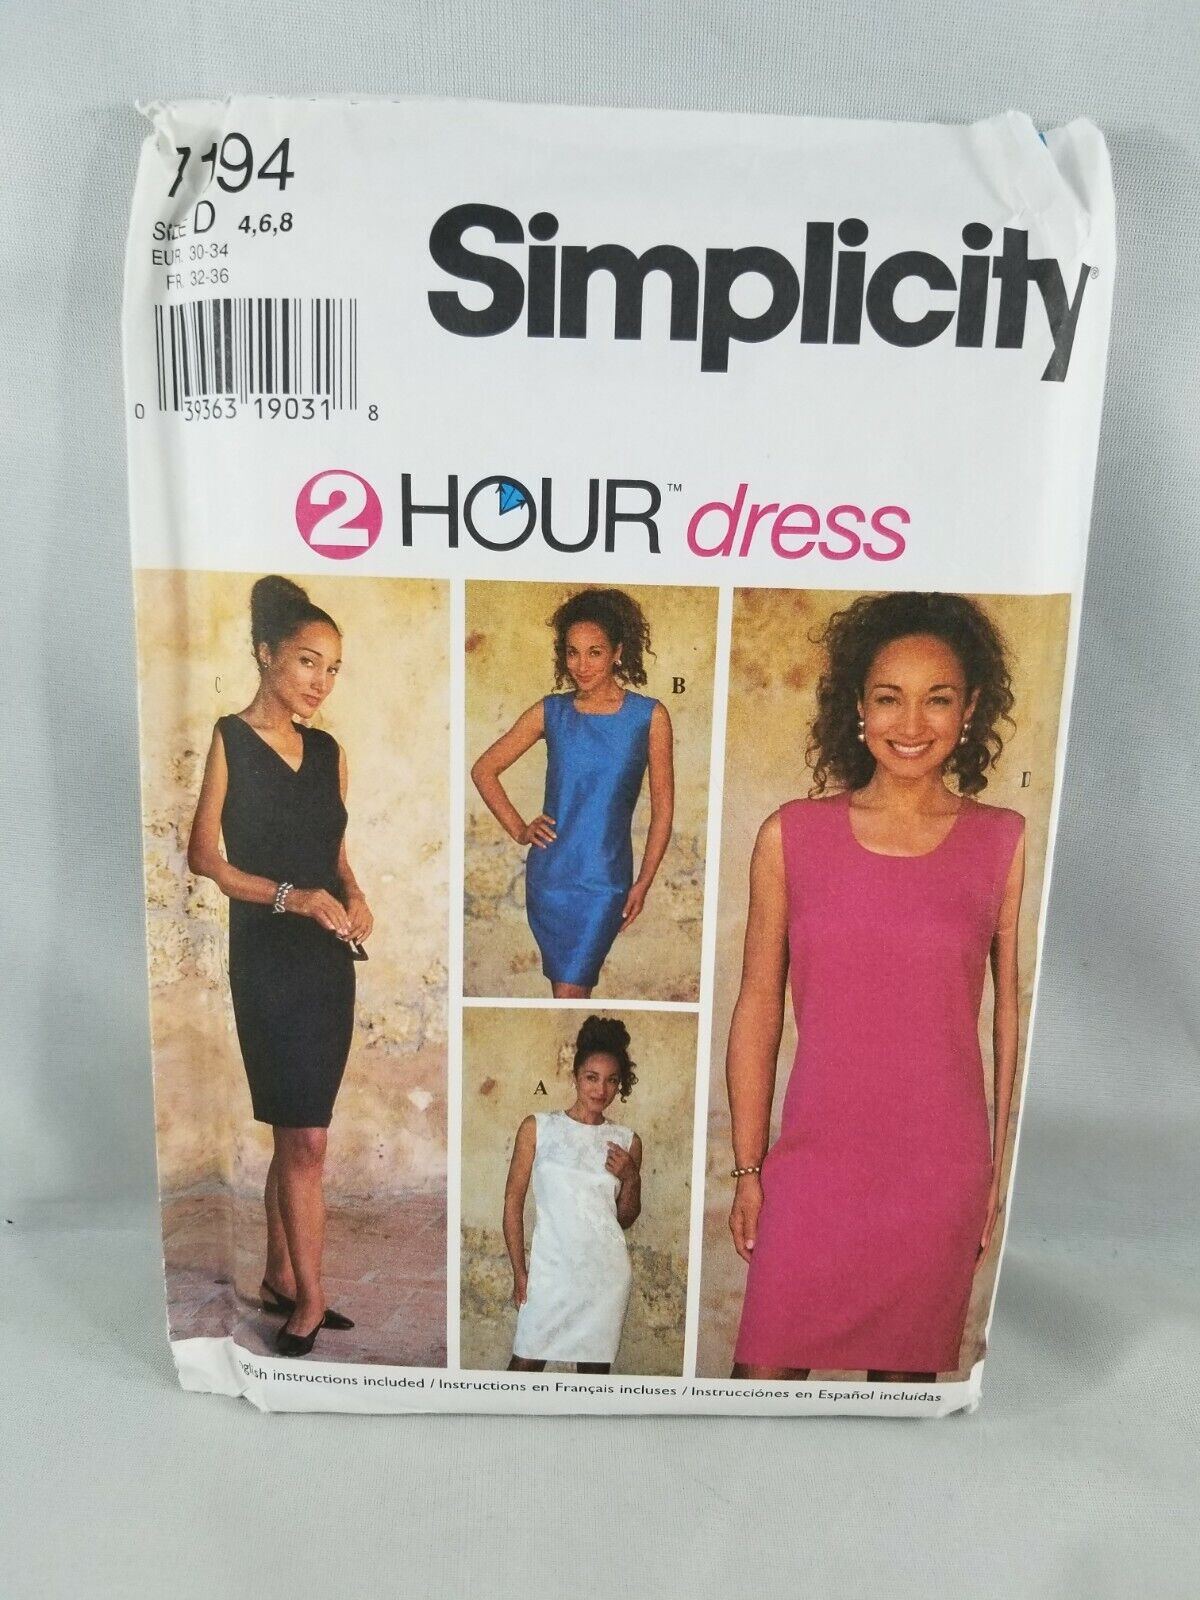 Simplicity 2 Hour Dress Sewing Pattern 7194 Size D 4, 6, 8 Straight 1996 Uncut